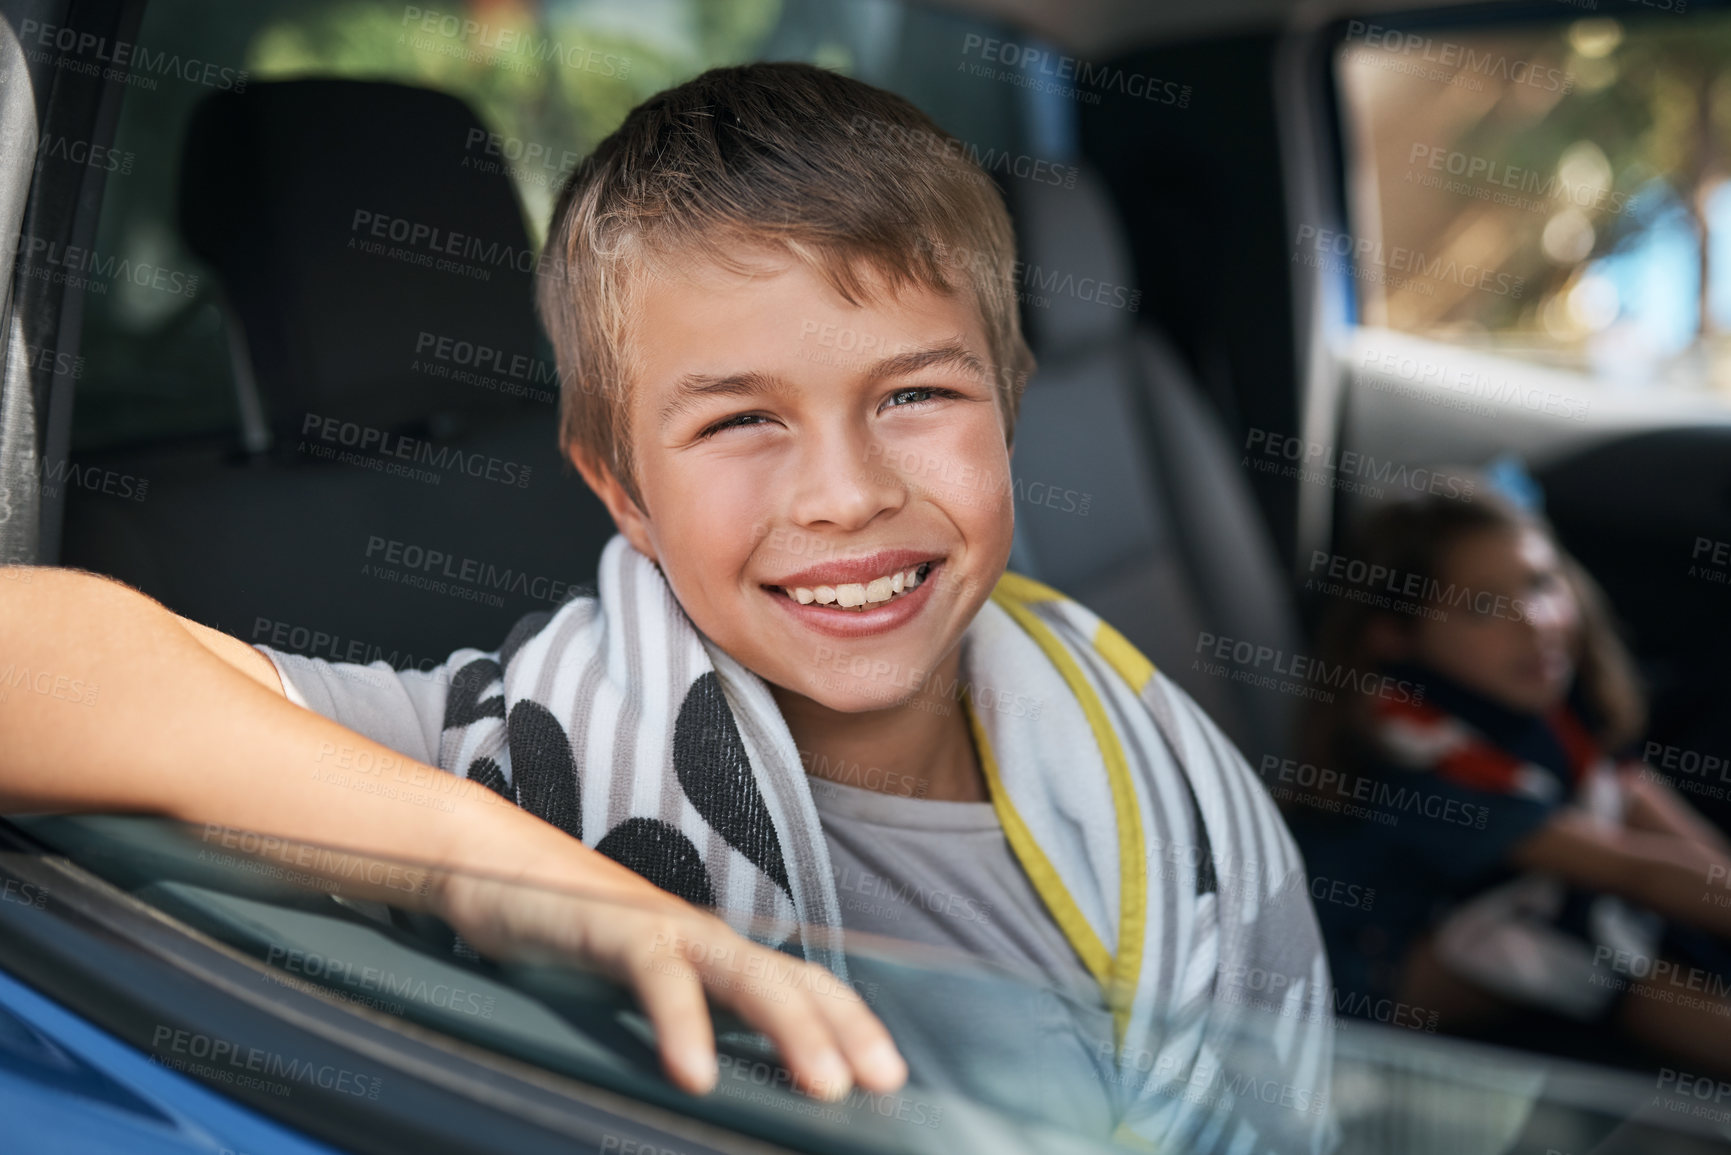 Buy stock photo Cropped portrait of a young boy sitting in the car before going on a roadtrip with his family